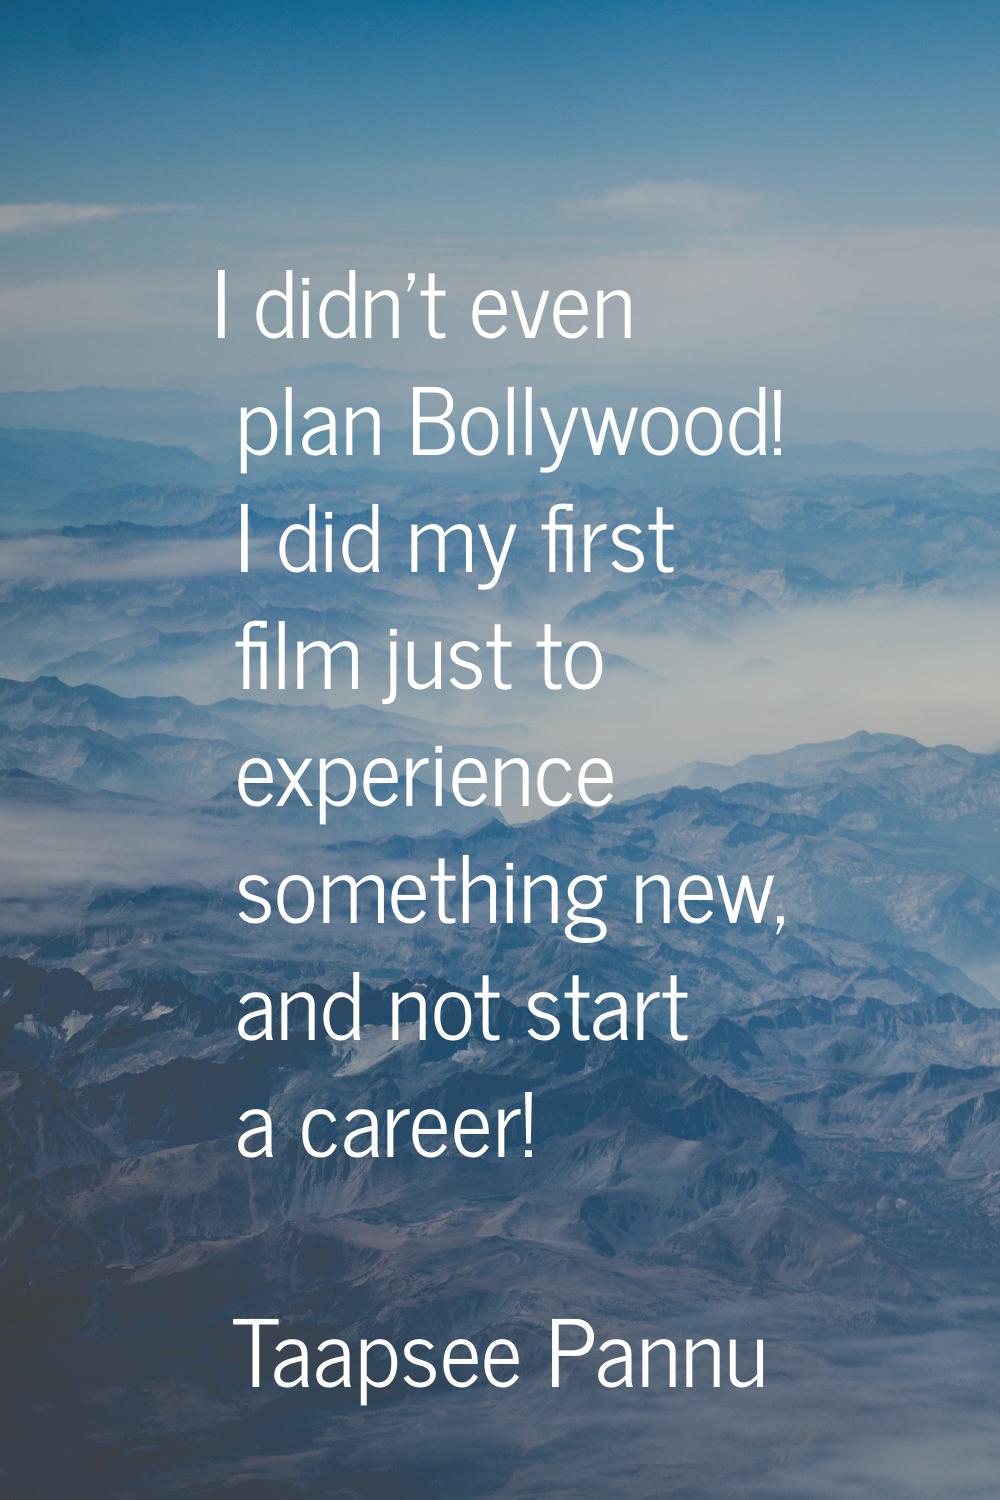 I didn't even plan Bollywood! I did my first film just to experience something new, and not start a